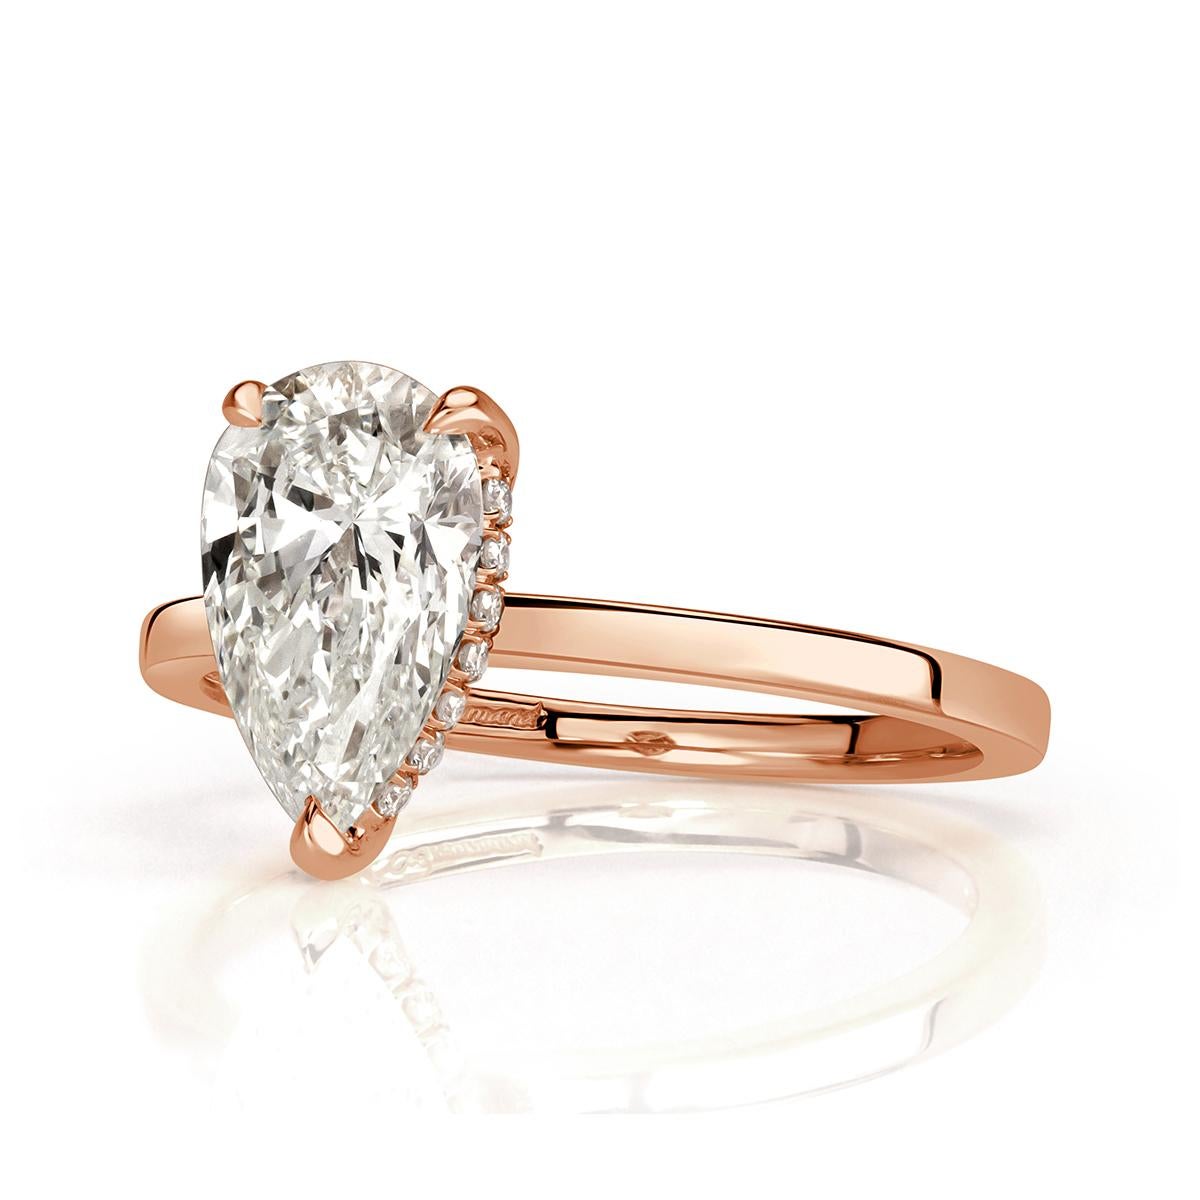 Created in our custom 18k rose gold solitaire setting style, this one of a kind diamond engagement ring features a gorgeous 1.50ct pear shaped center diamond, GIA certified at J in color, VS2 in clarity. It is accented by a hidden halo of round